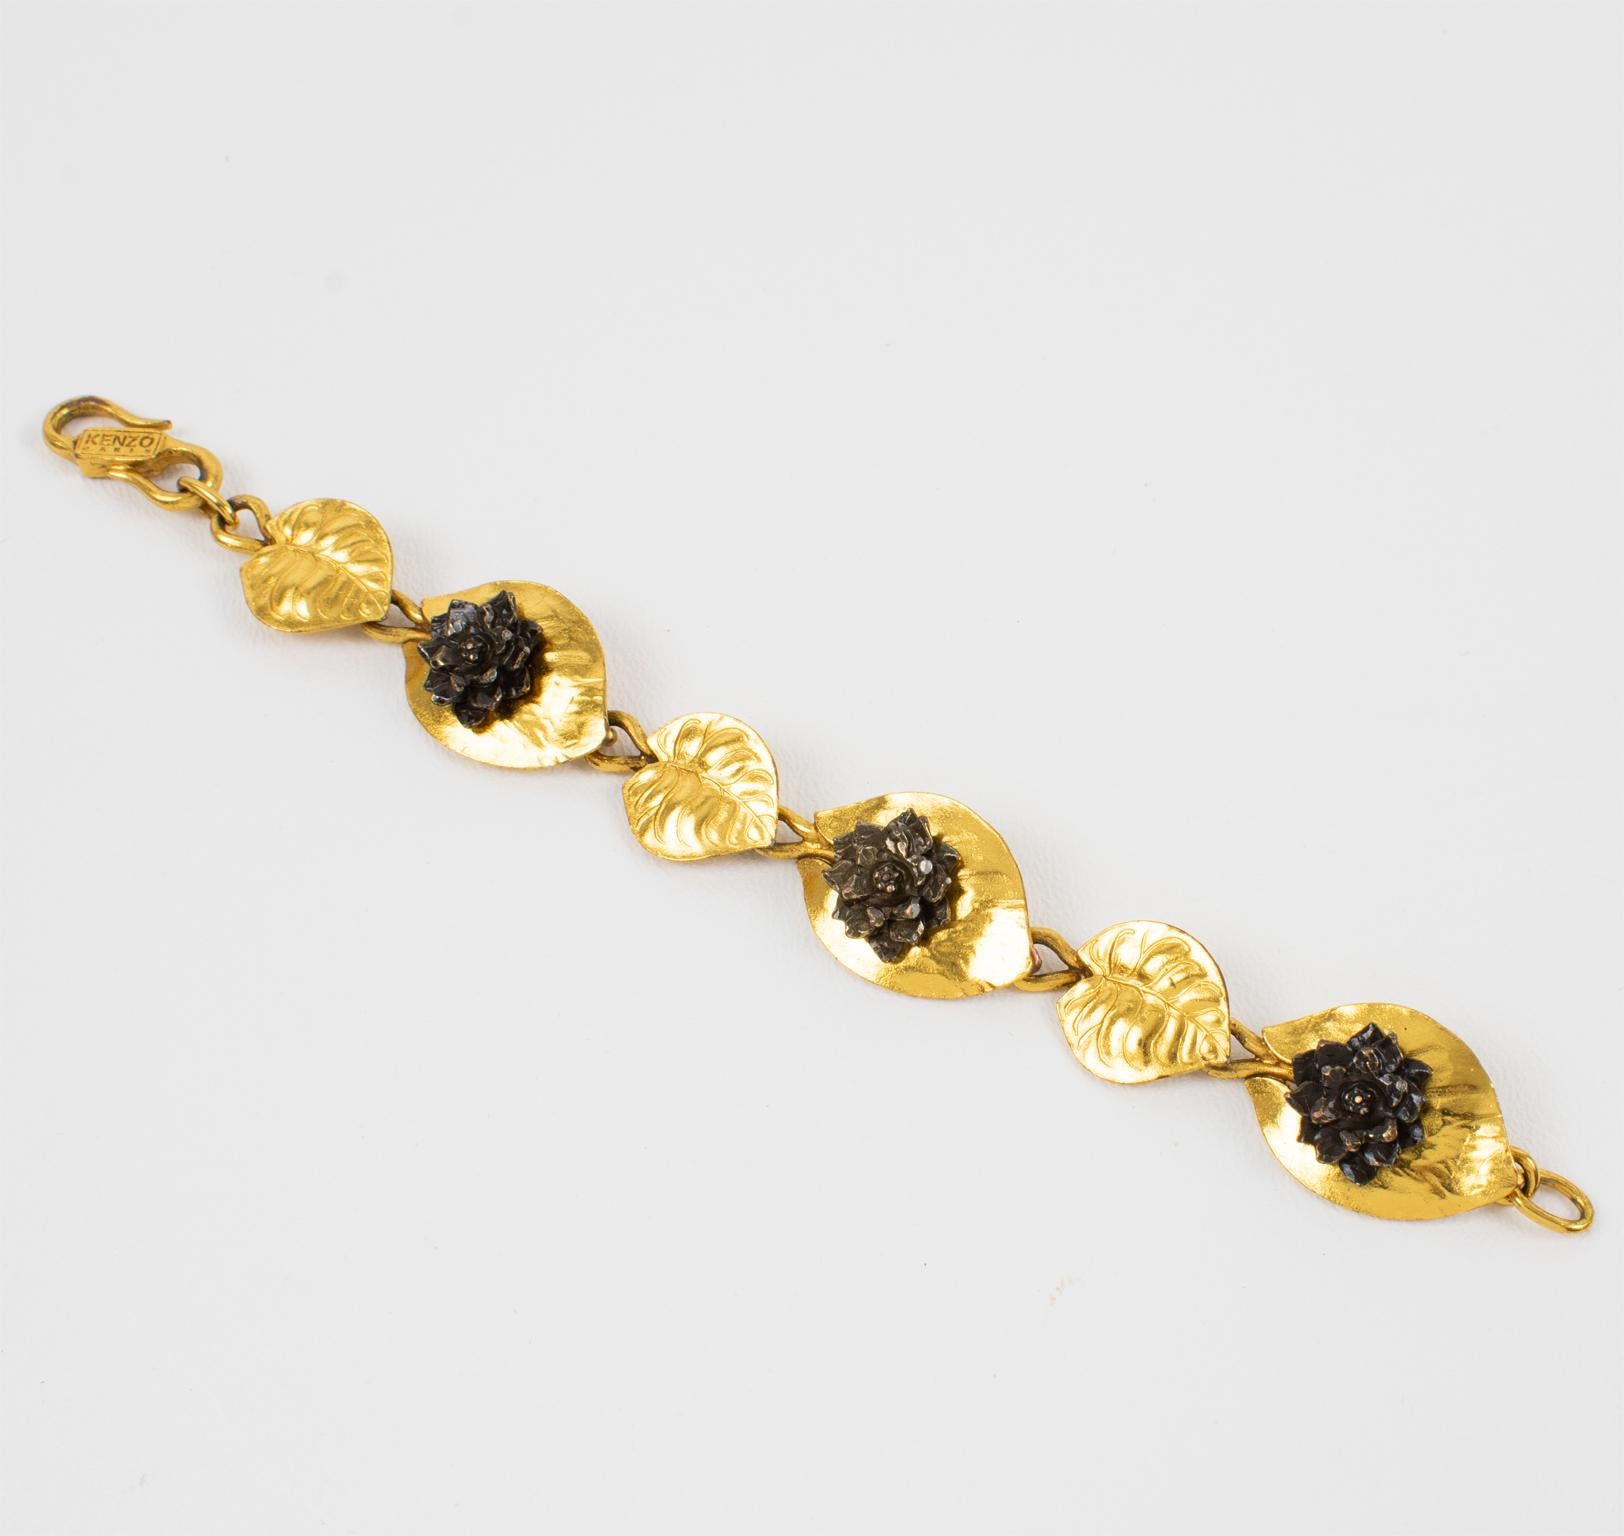 This charming Kenzo Paris floral link bracelet features gilded metal and bronze, all carved and textured water lily flowers and leaves. The bracelet closes with an 